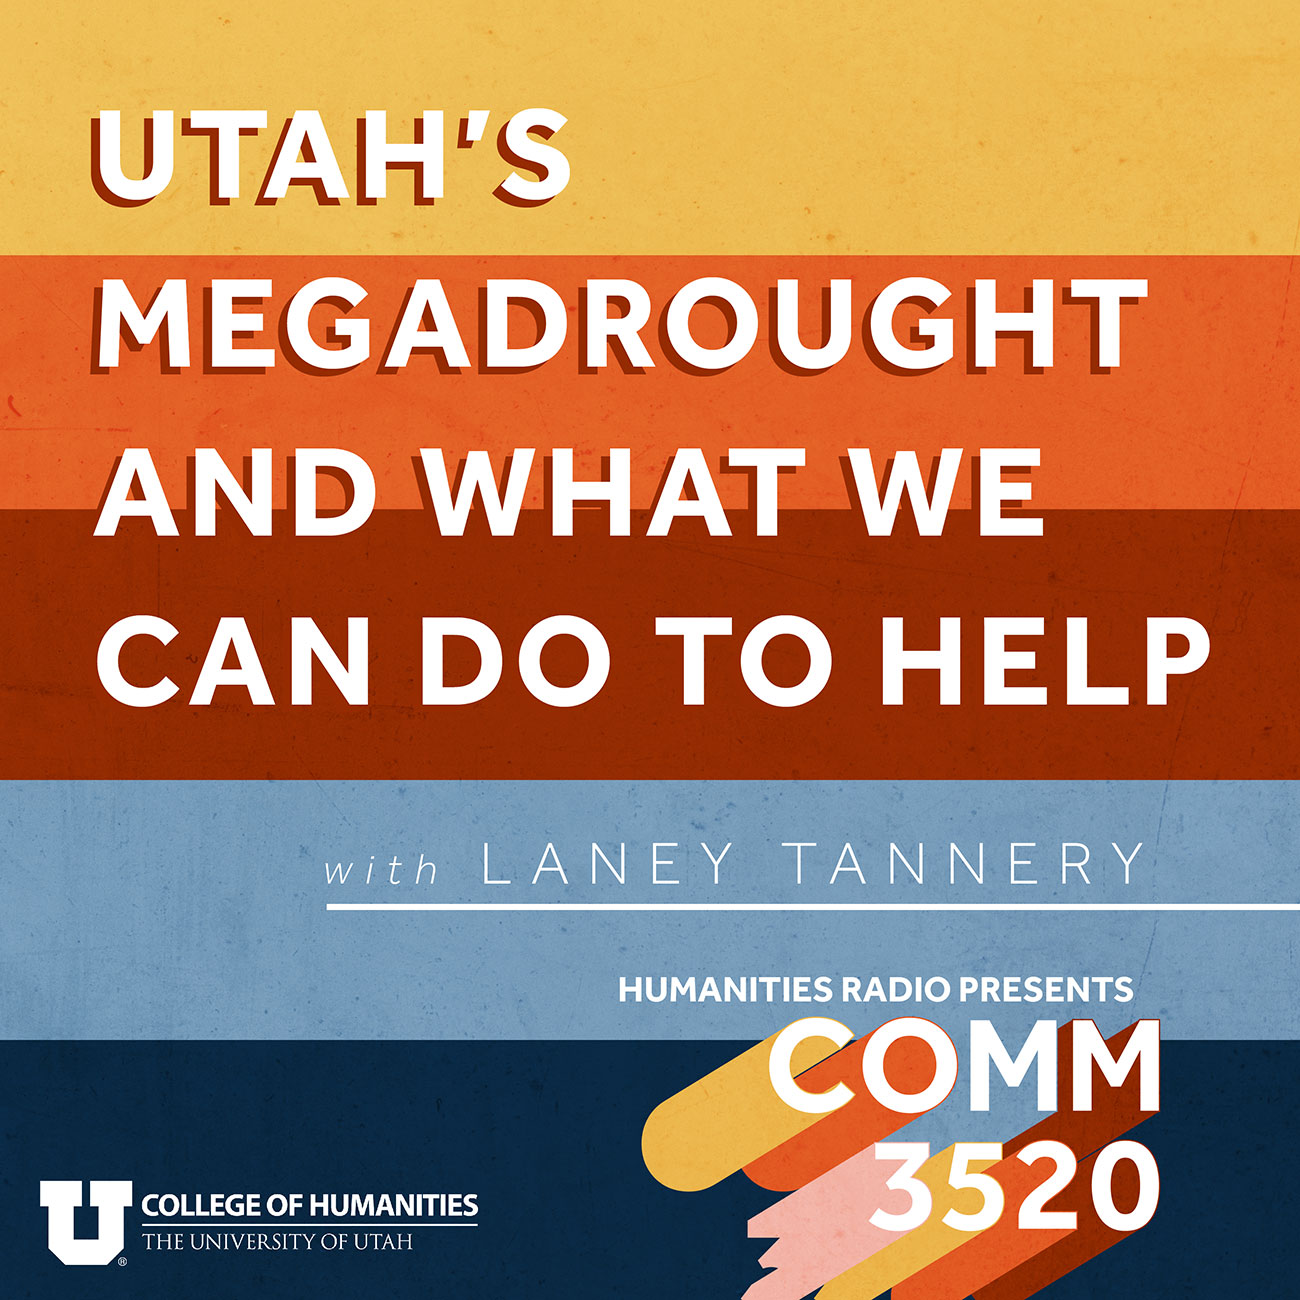 Utah’s MegaDrought and What We Can Do to Help